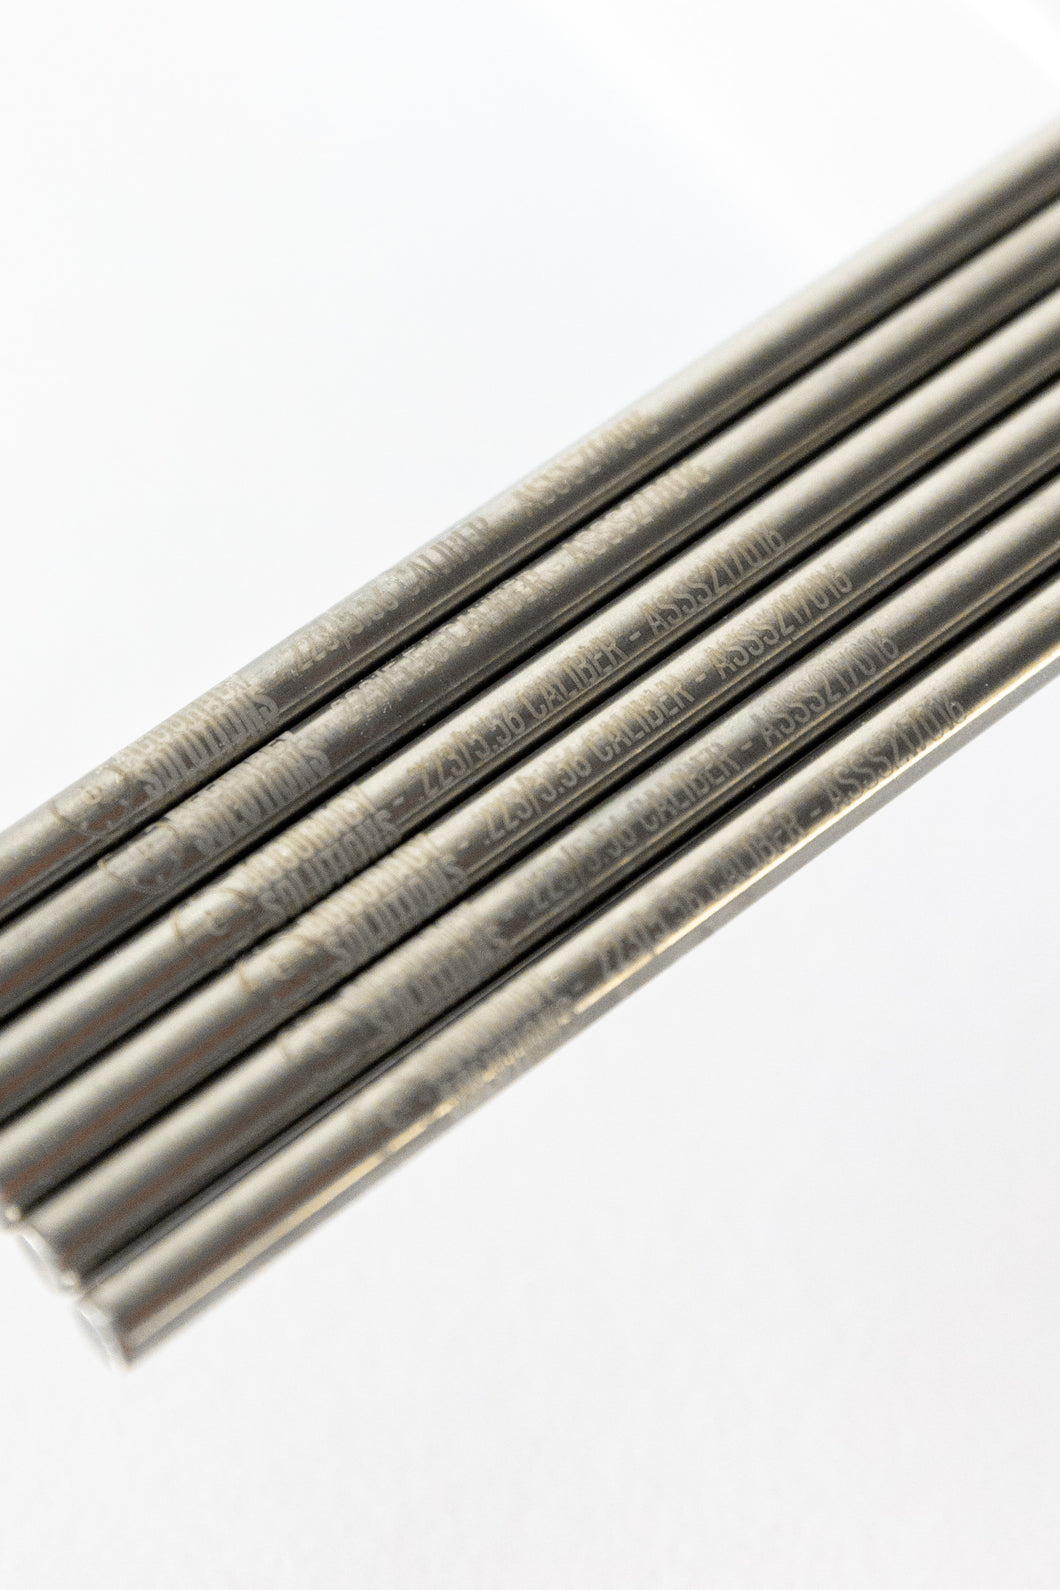 .223/5.56 Stainless Steel Bore Alignment Rod